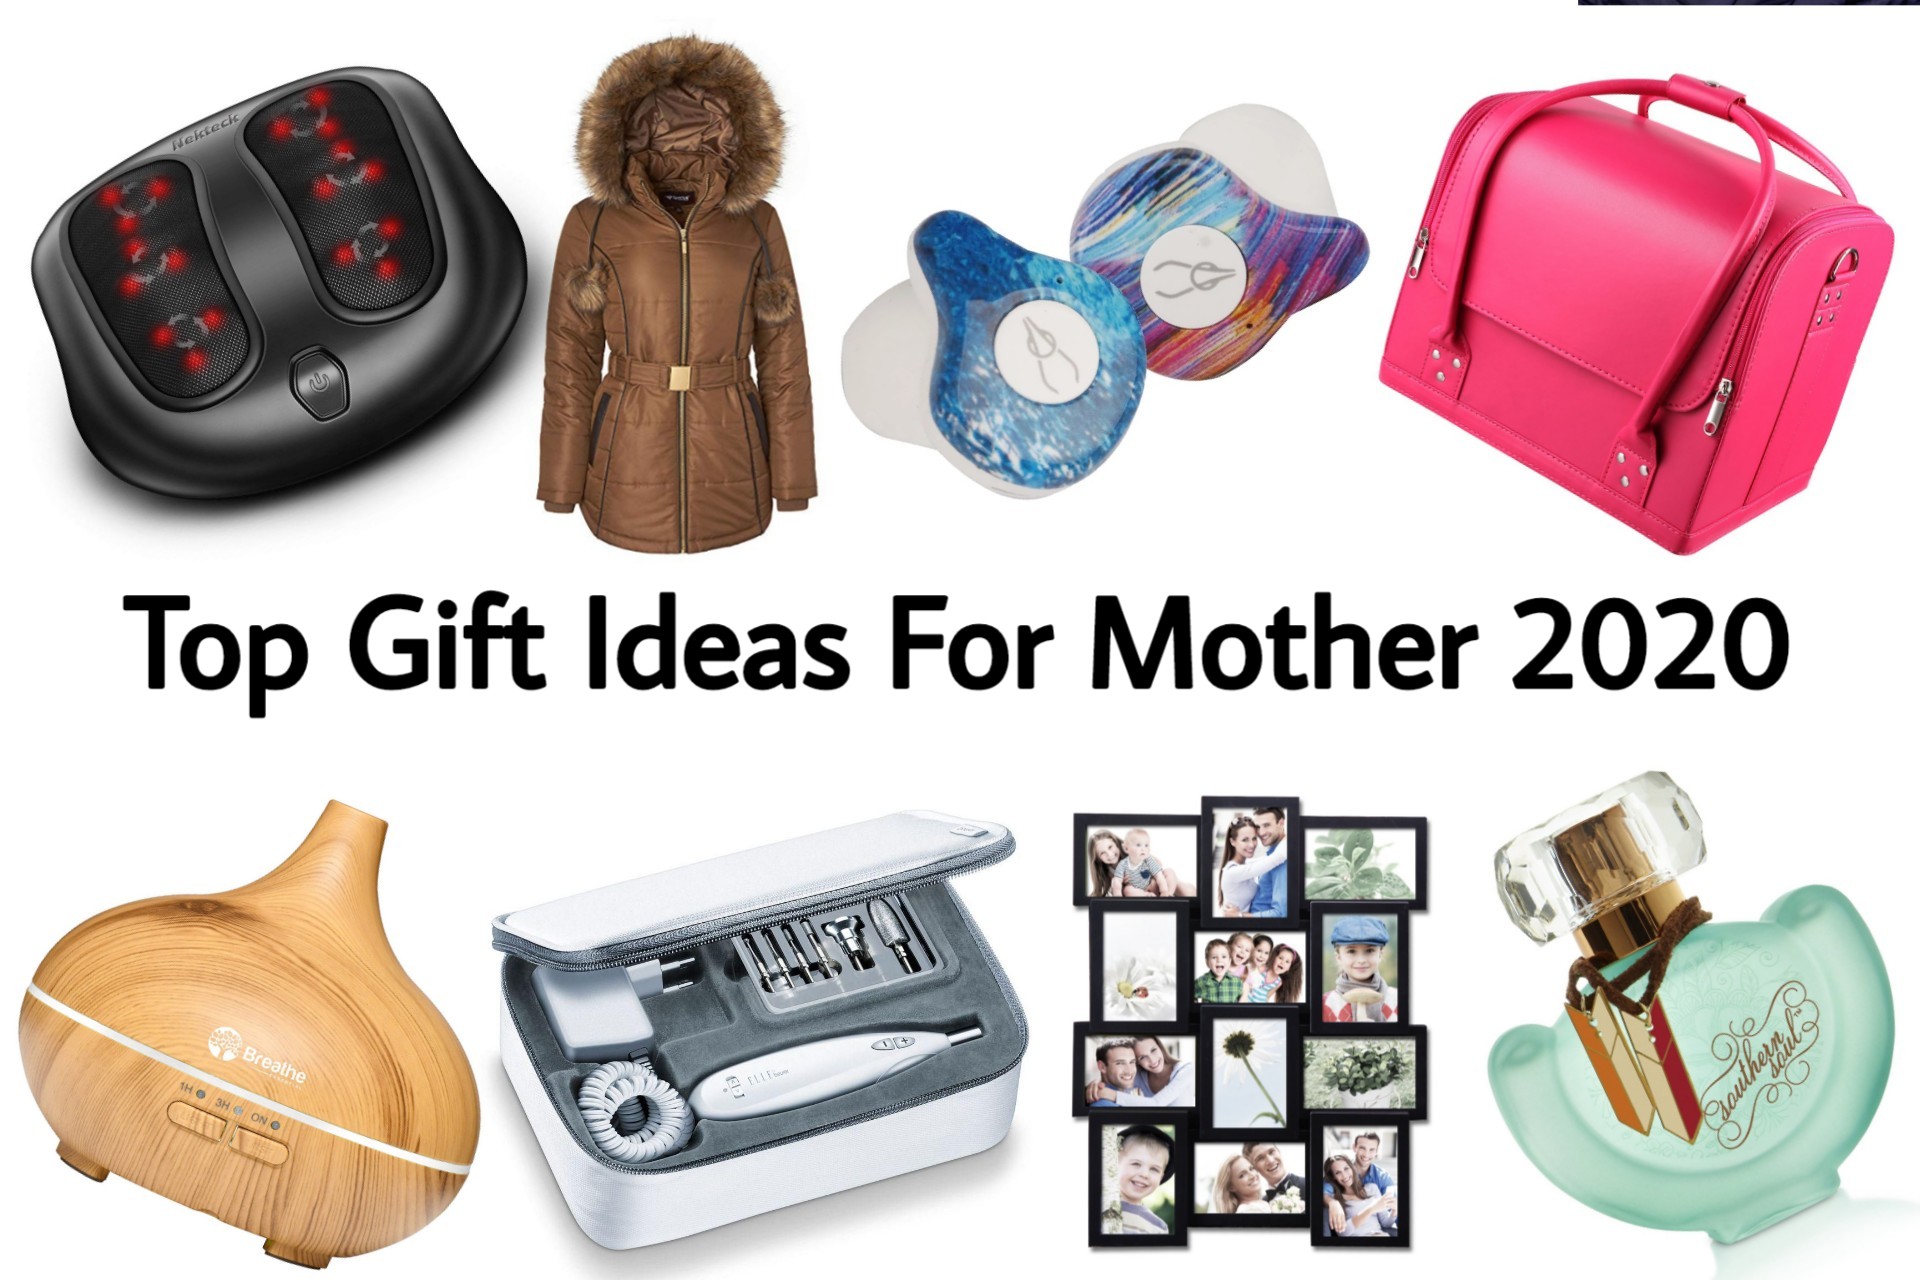 100 Best Christmas Gifts For Mom For 2021 - Prudent Penny Pincher